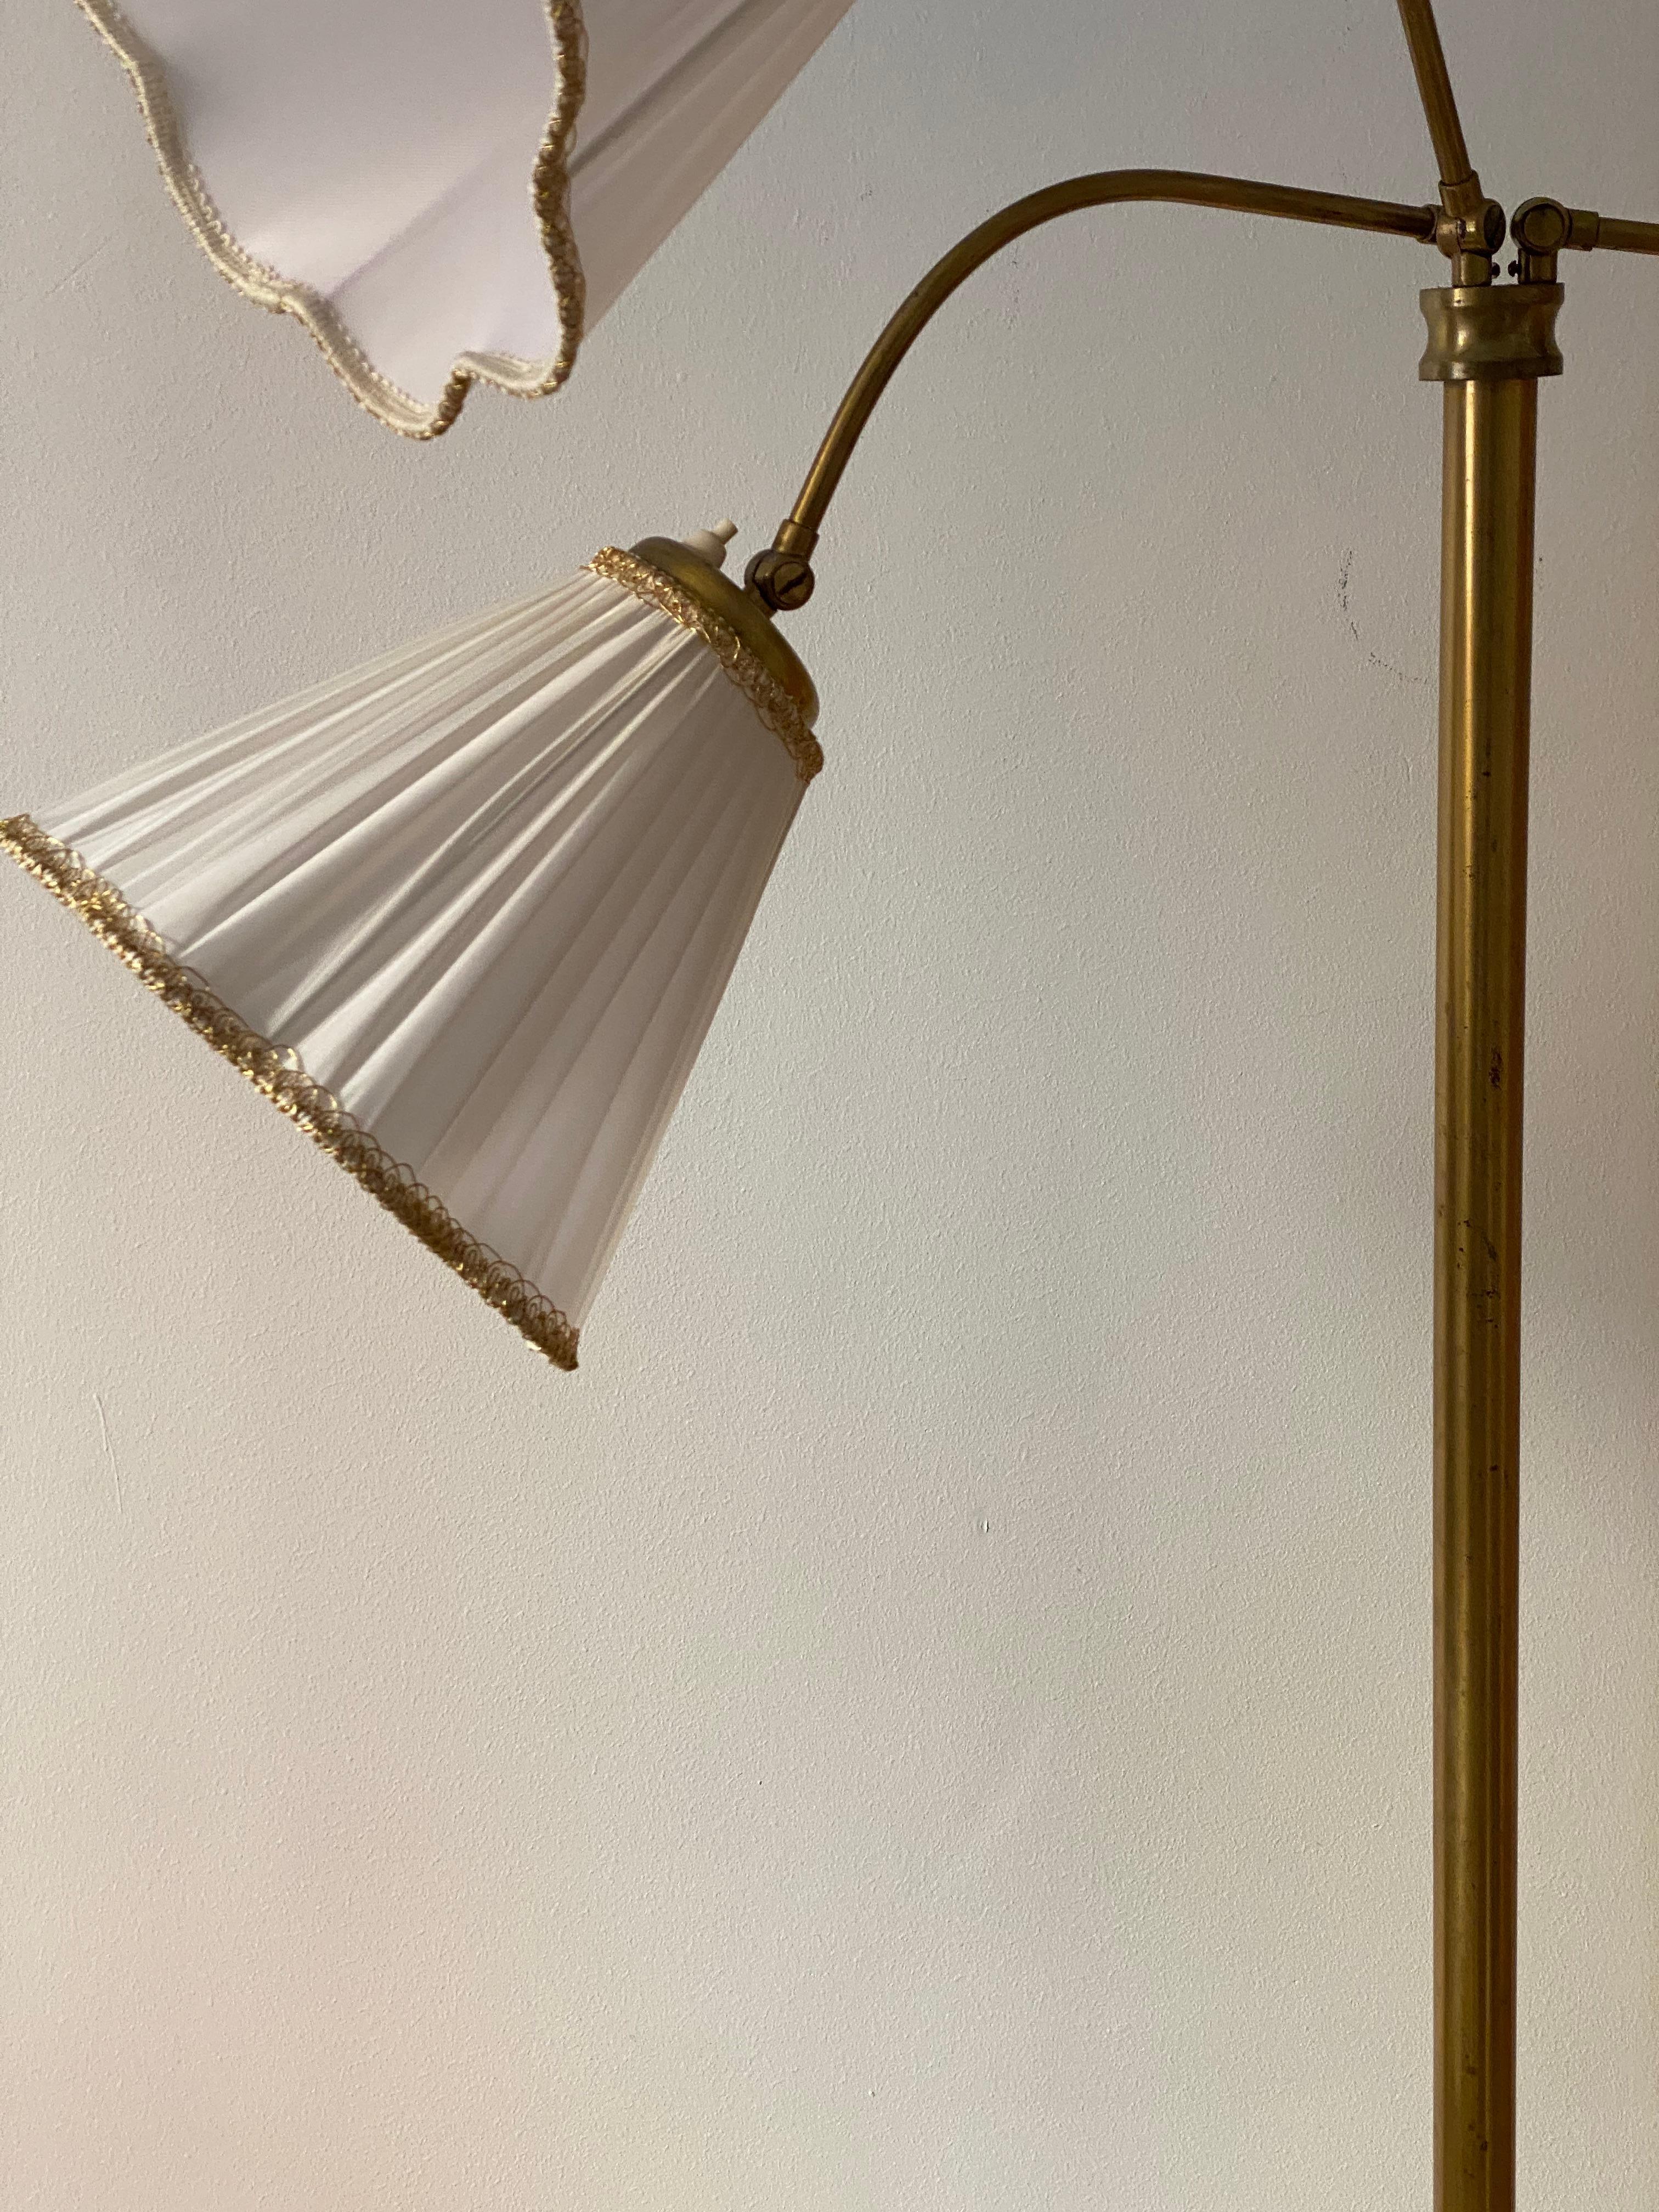 An adjustable functionalist floor lamp. Designed and produced in Sweden, 1940s. With brand new lampshades.

 